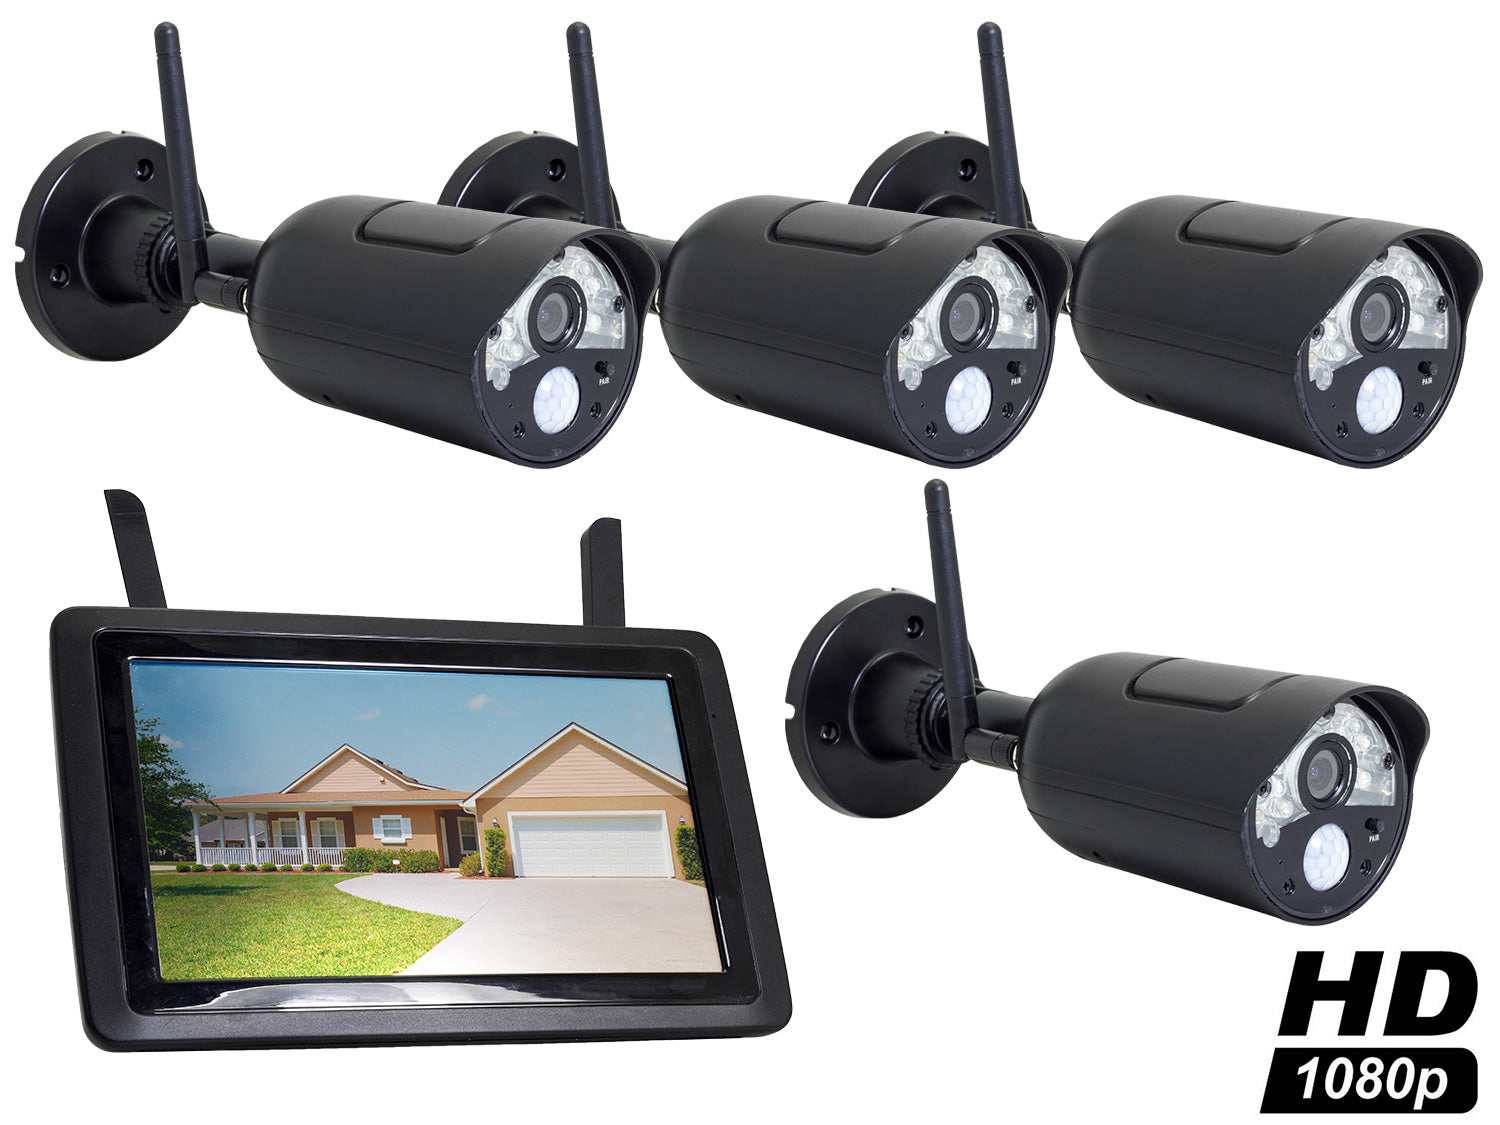 Introducing our new 1080p Wireless CCTV Kits